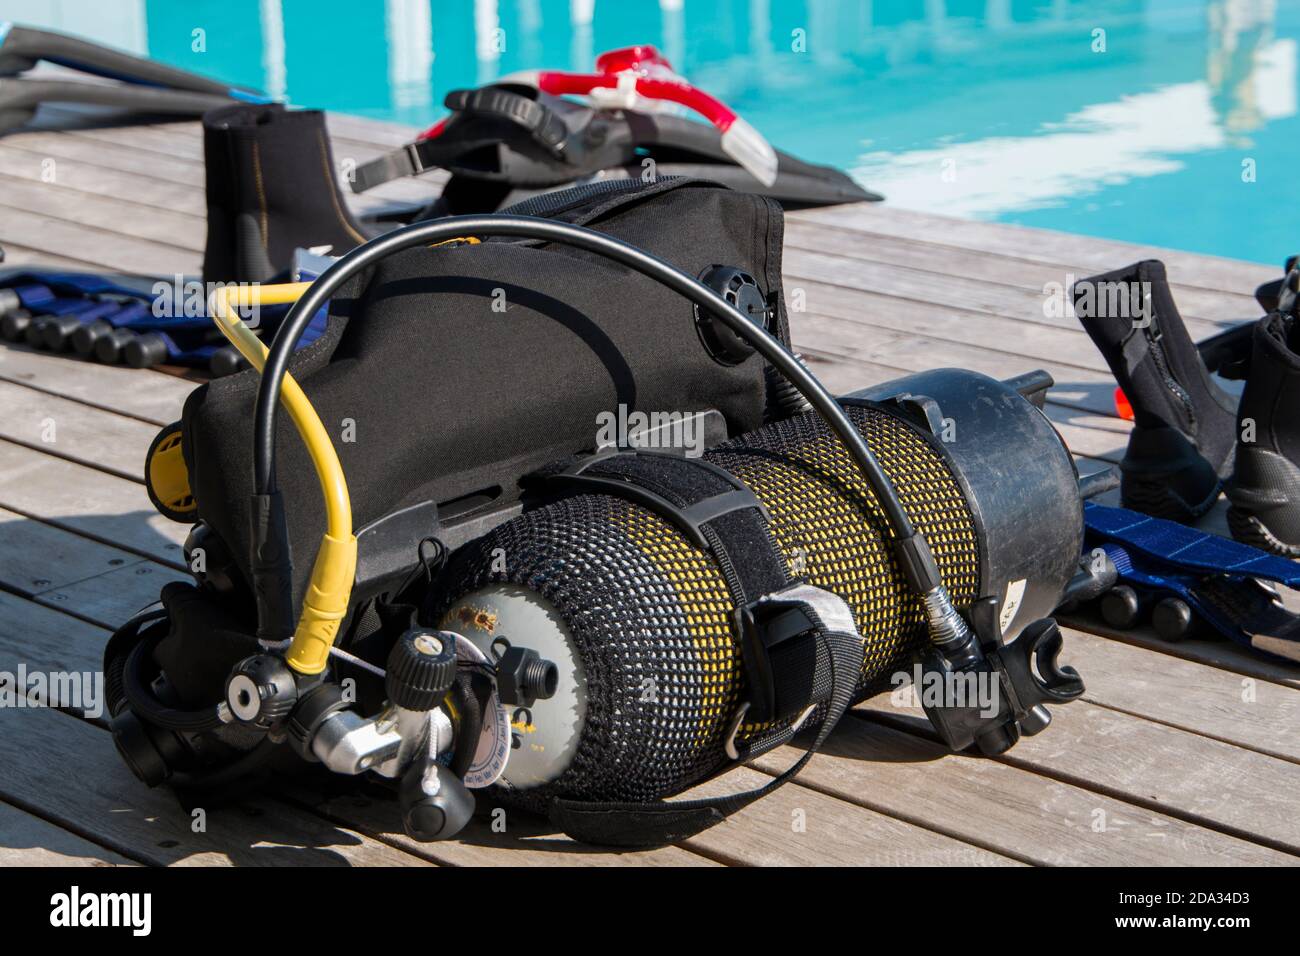 Scuba diving gear laying next to a training pool ready to be used Stock Photo